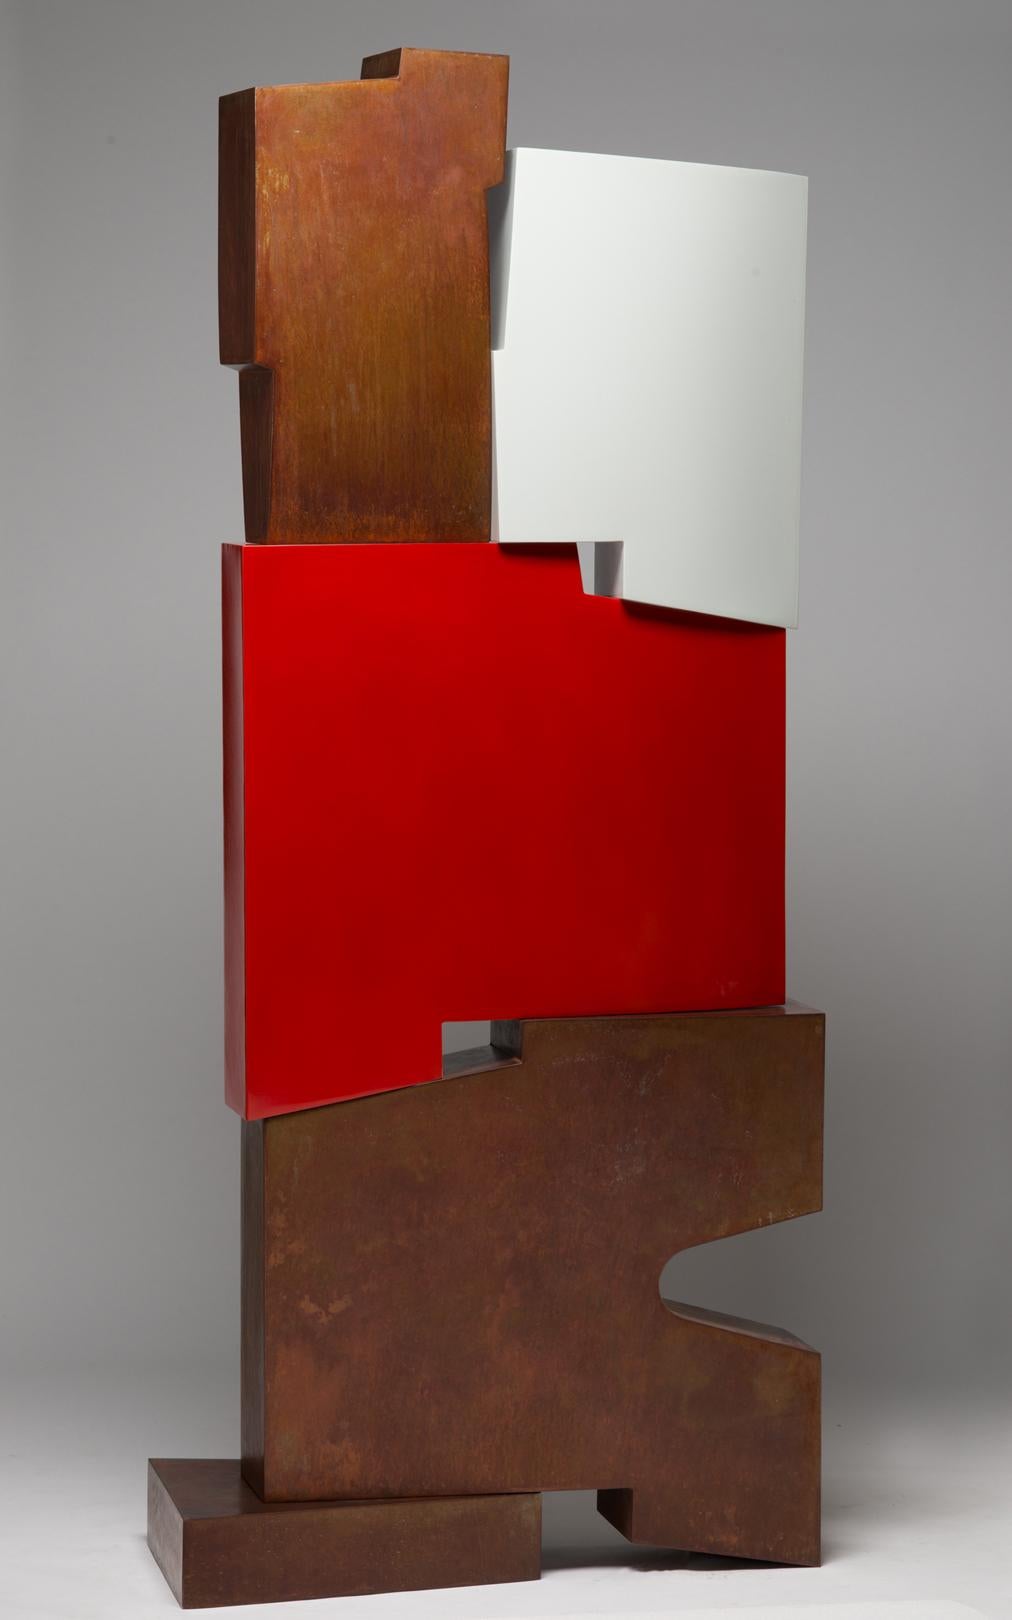 Pascal Pierme Abstract Sculpture - Tall outside sculpture, geometric abstract steel sculpture, steel and red